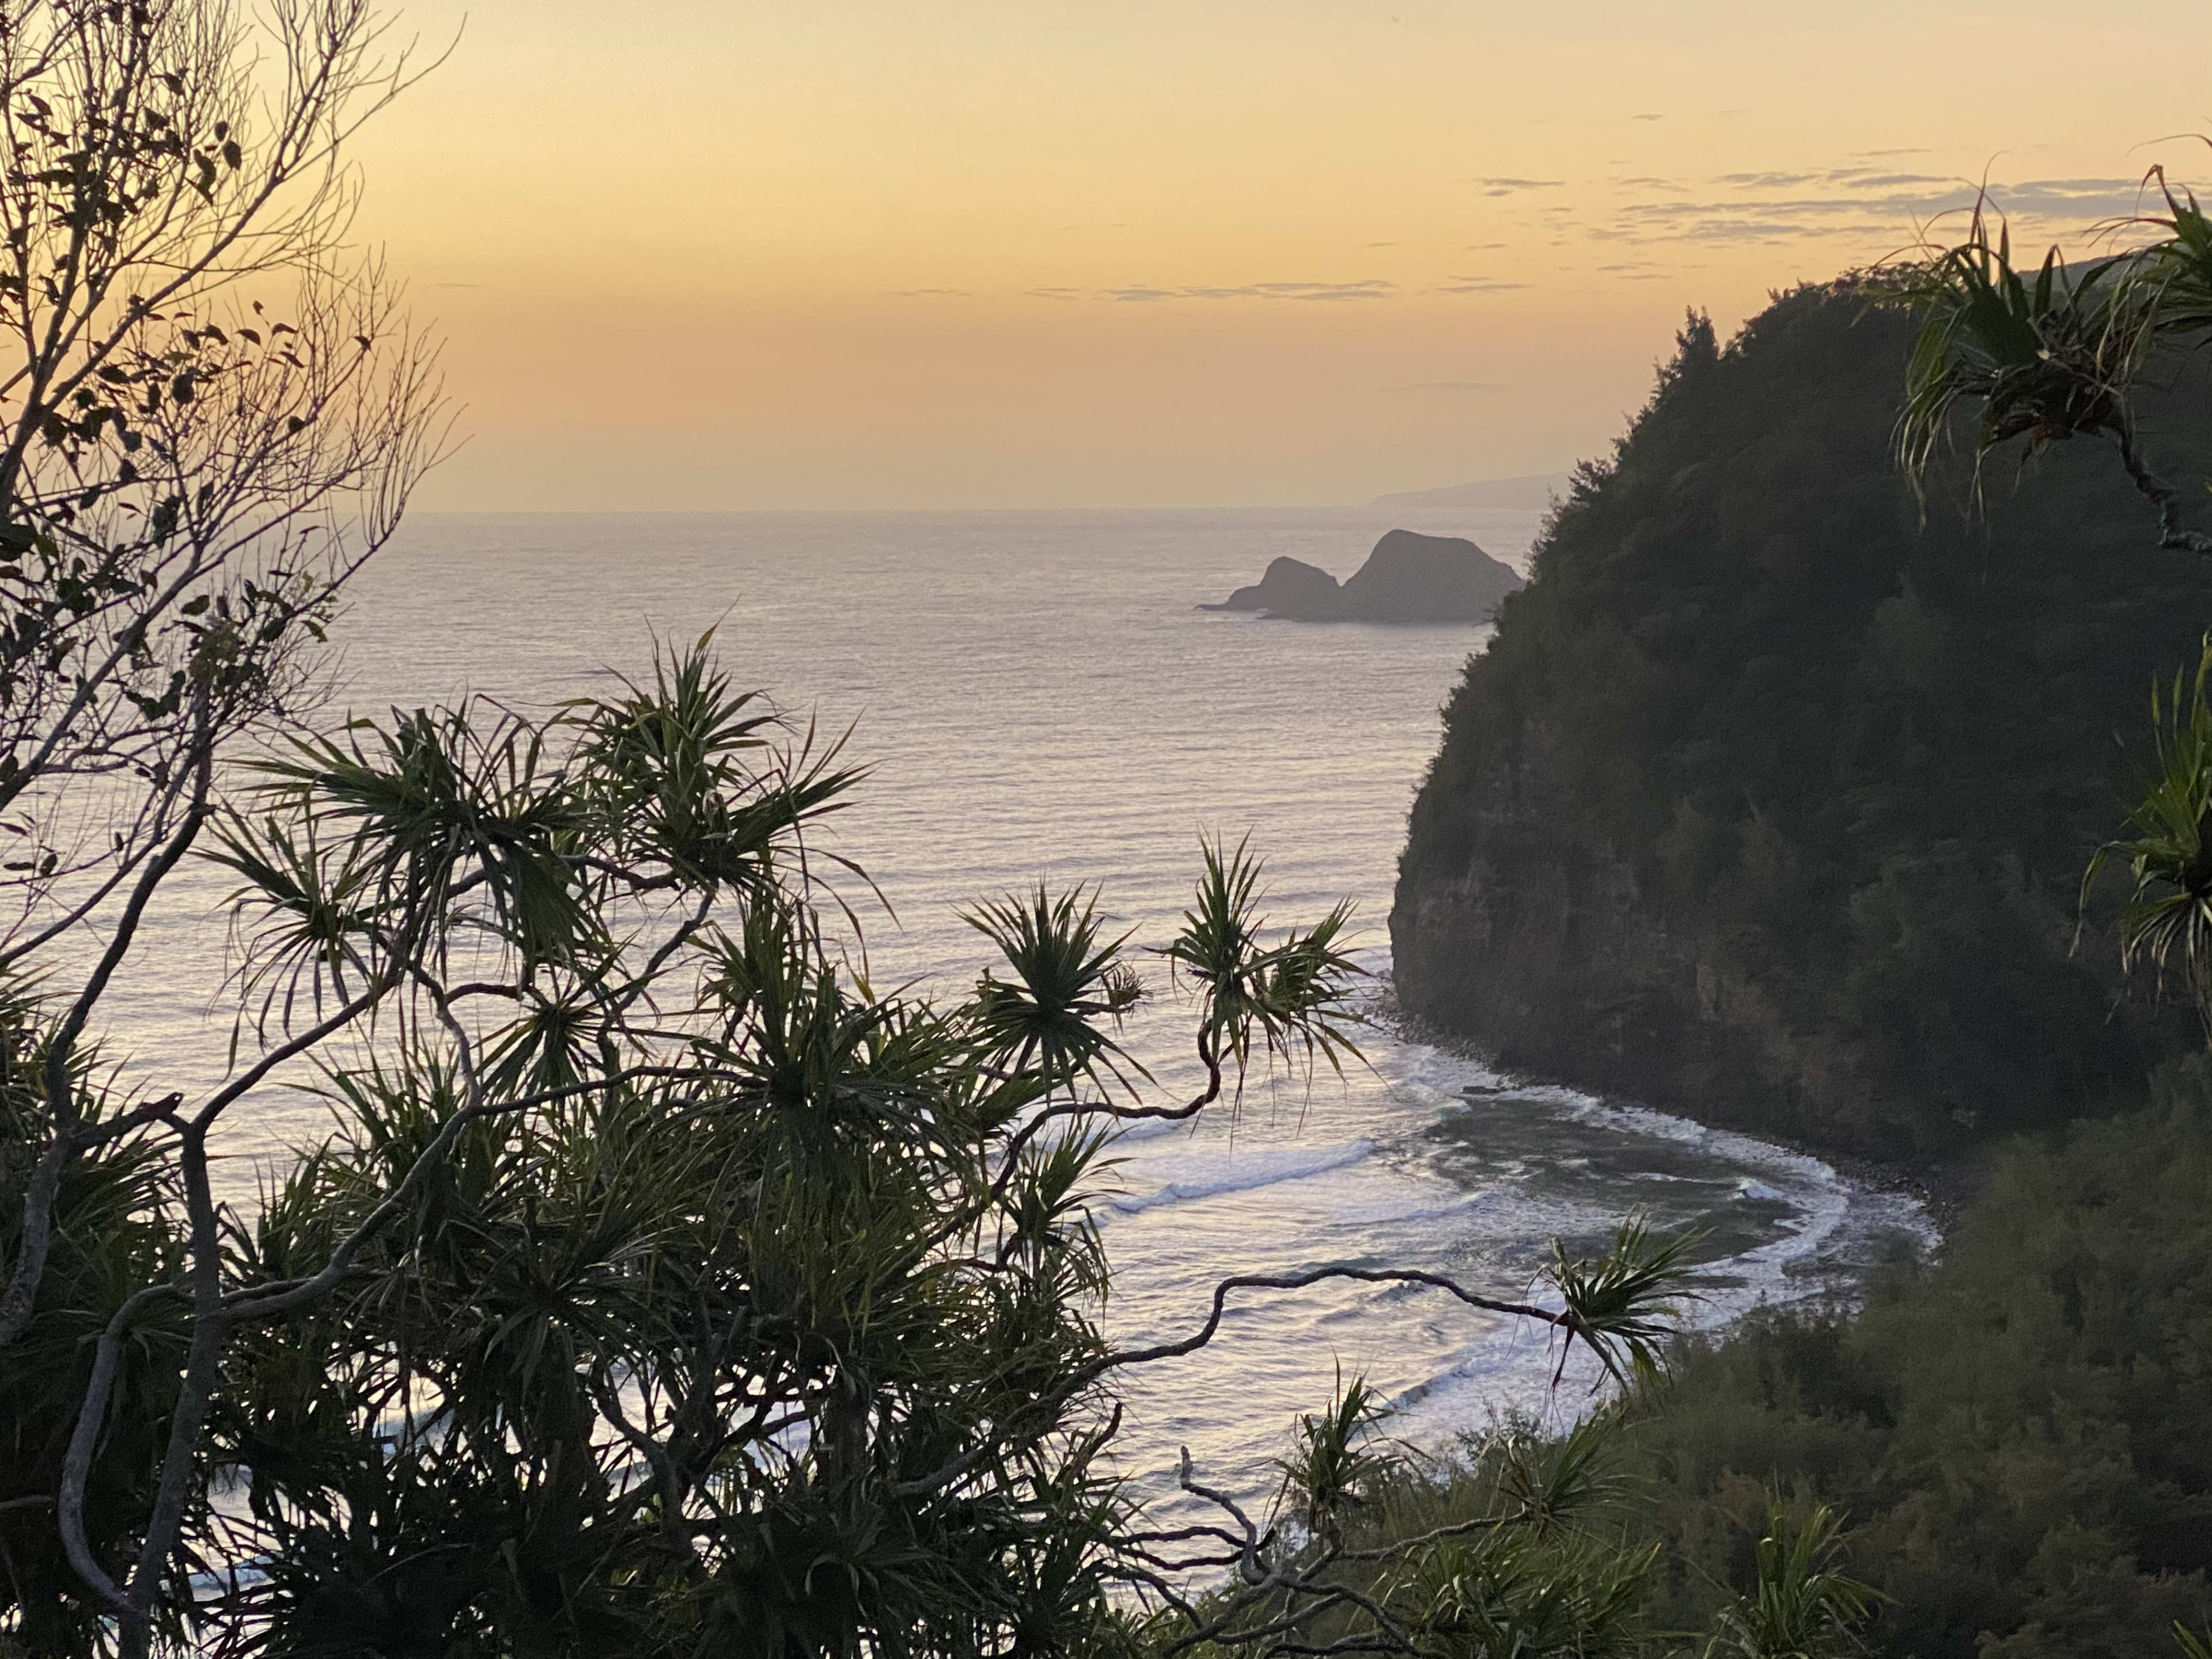 Sunrise at the very close Pololu Valley